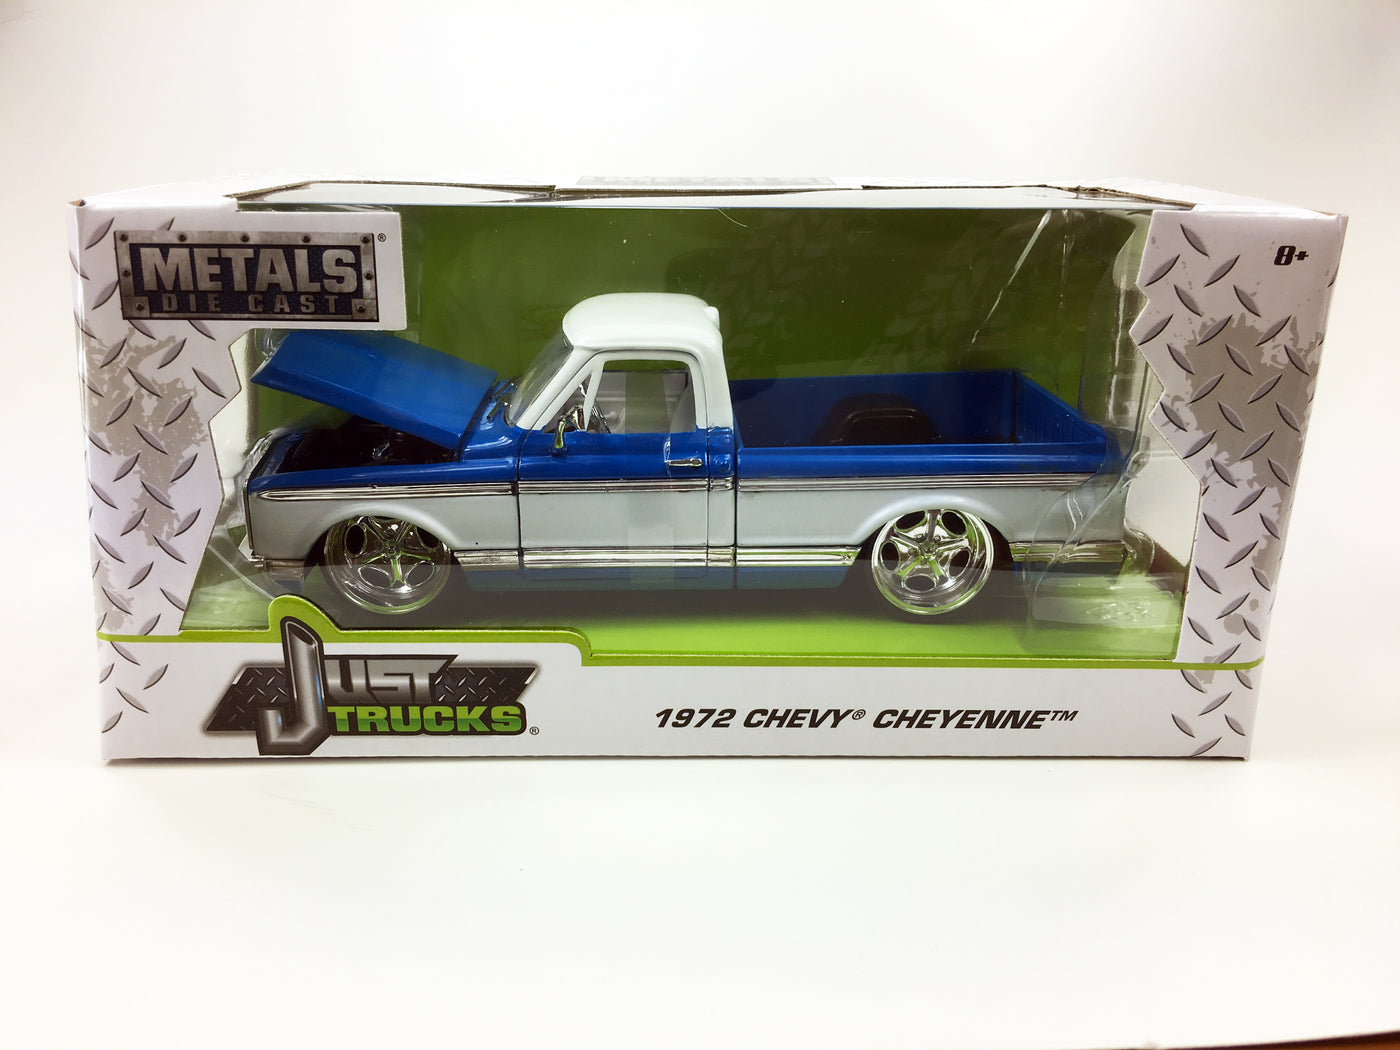 1972 chevy truck toy